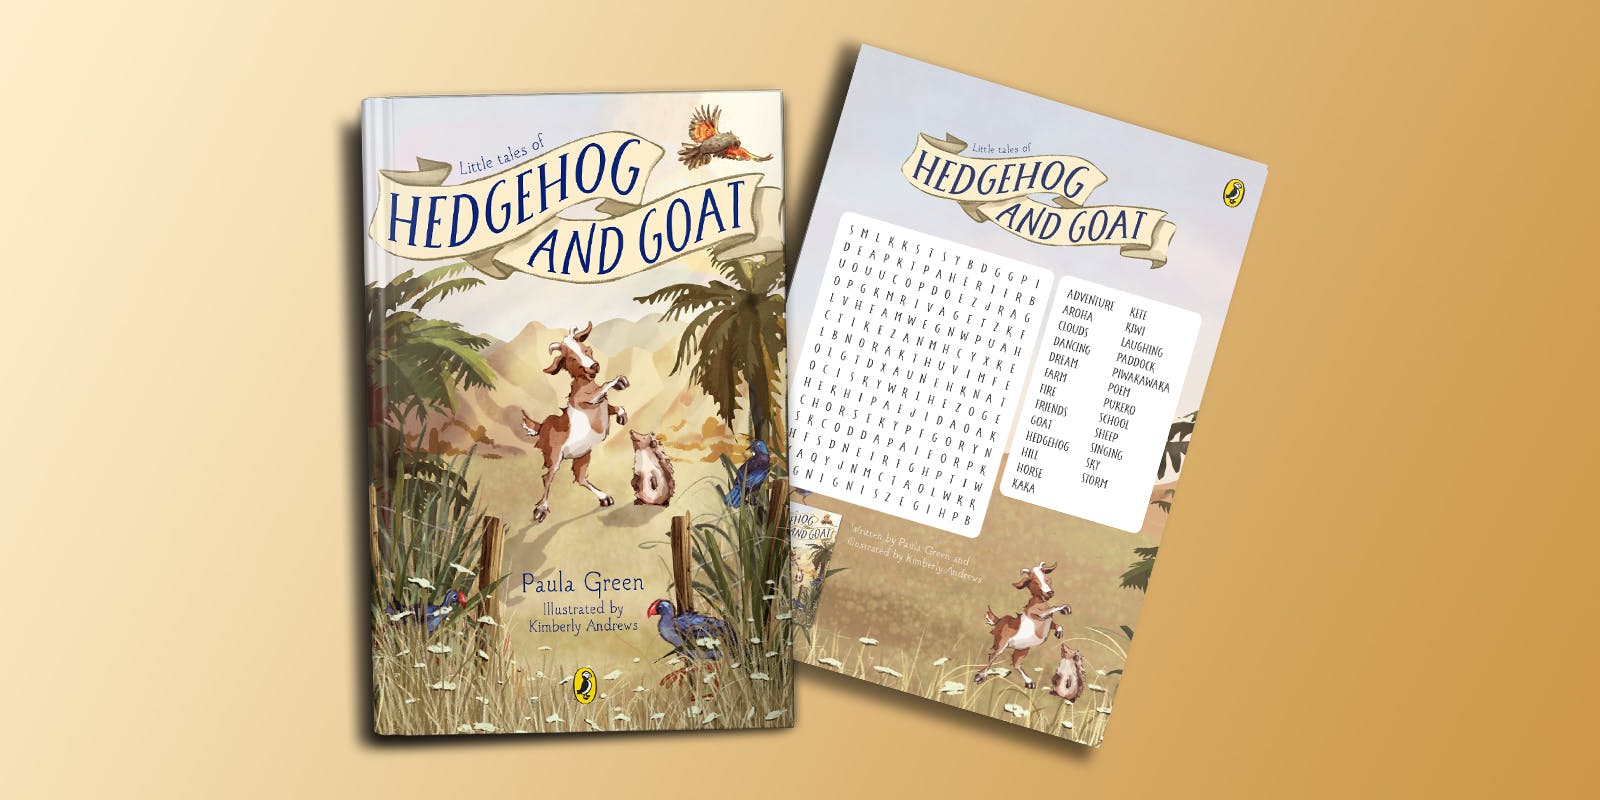 Little Tales of Hedgehog and Goat word search